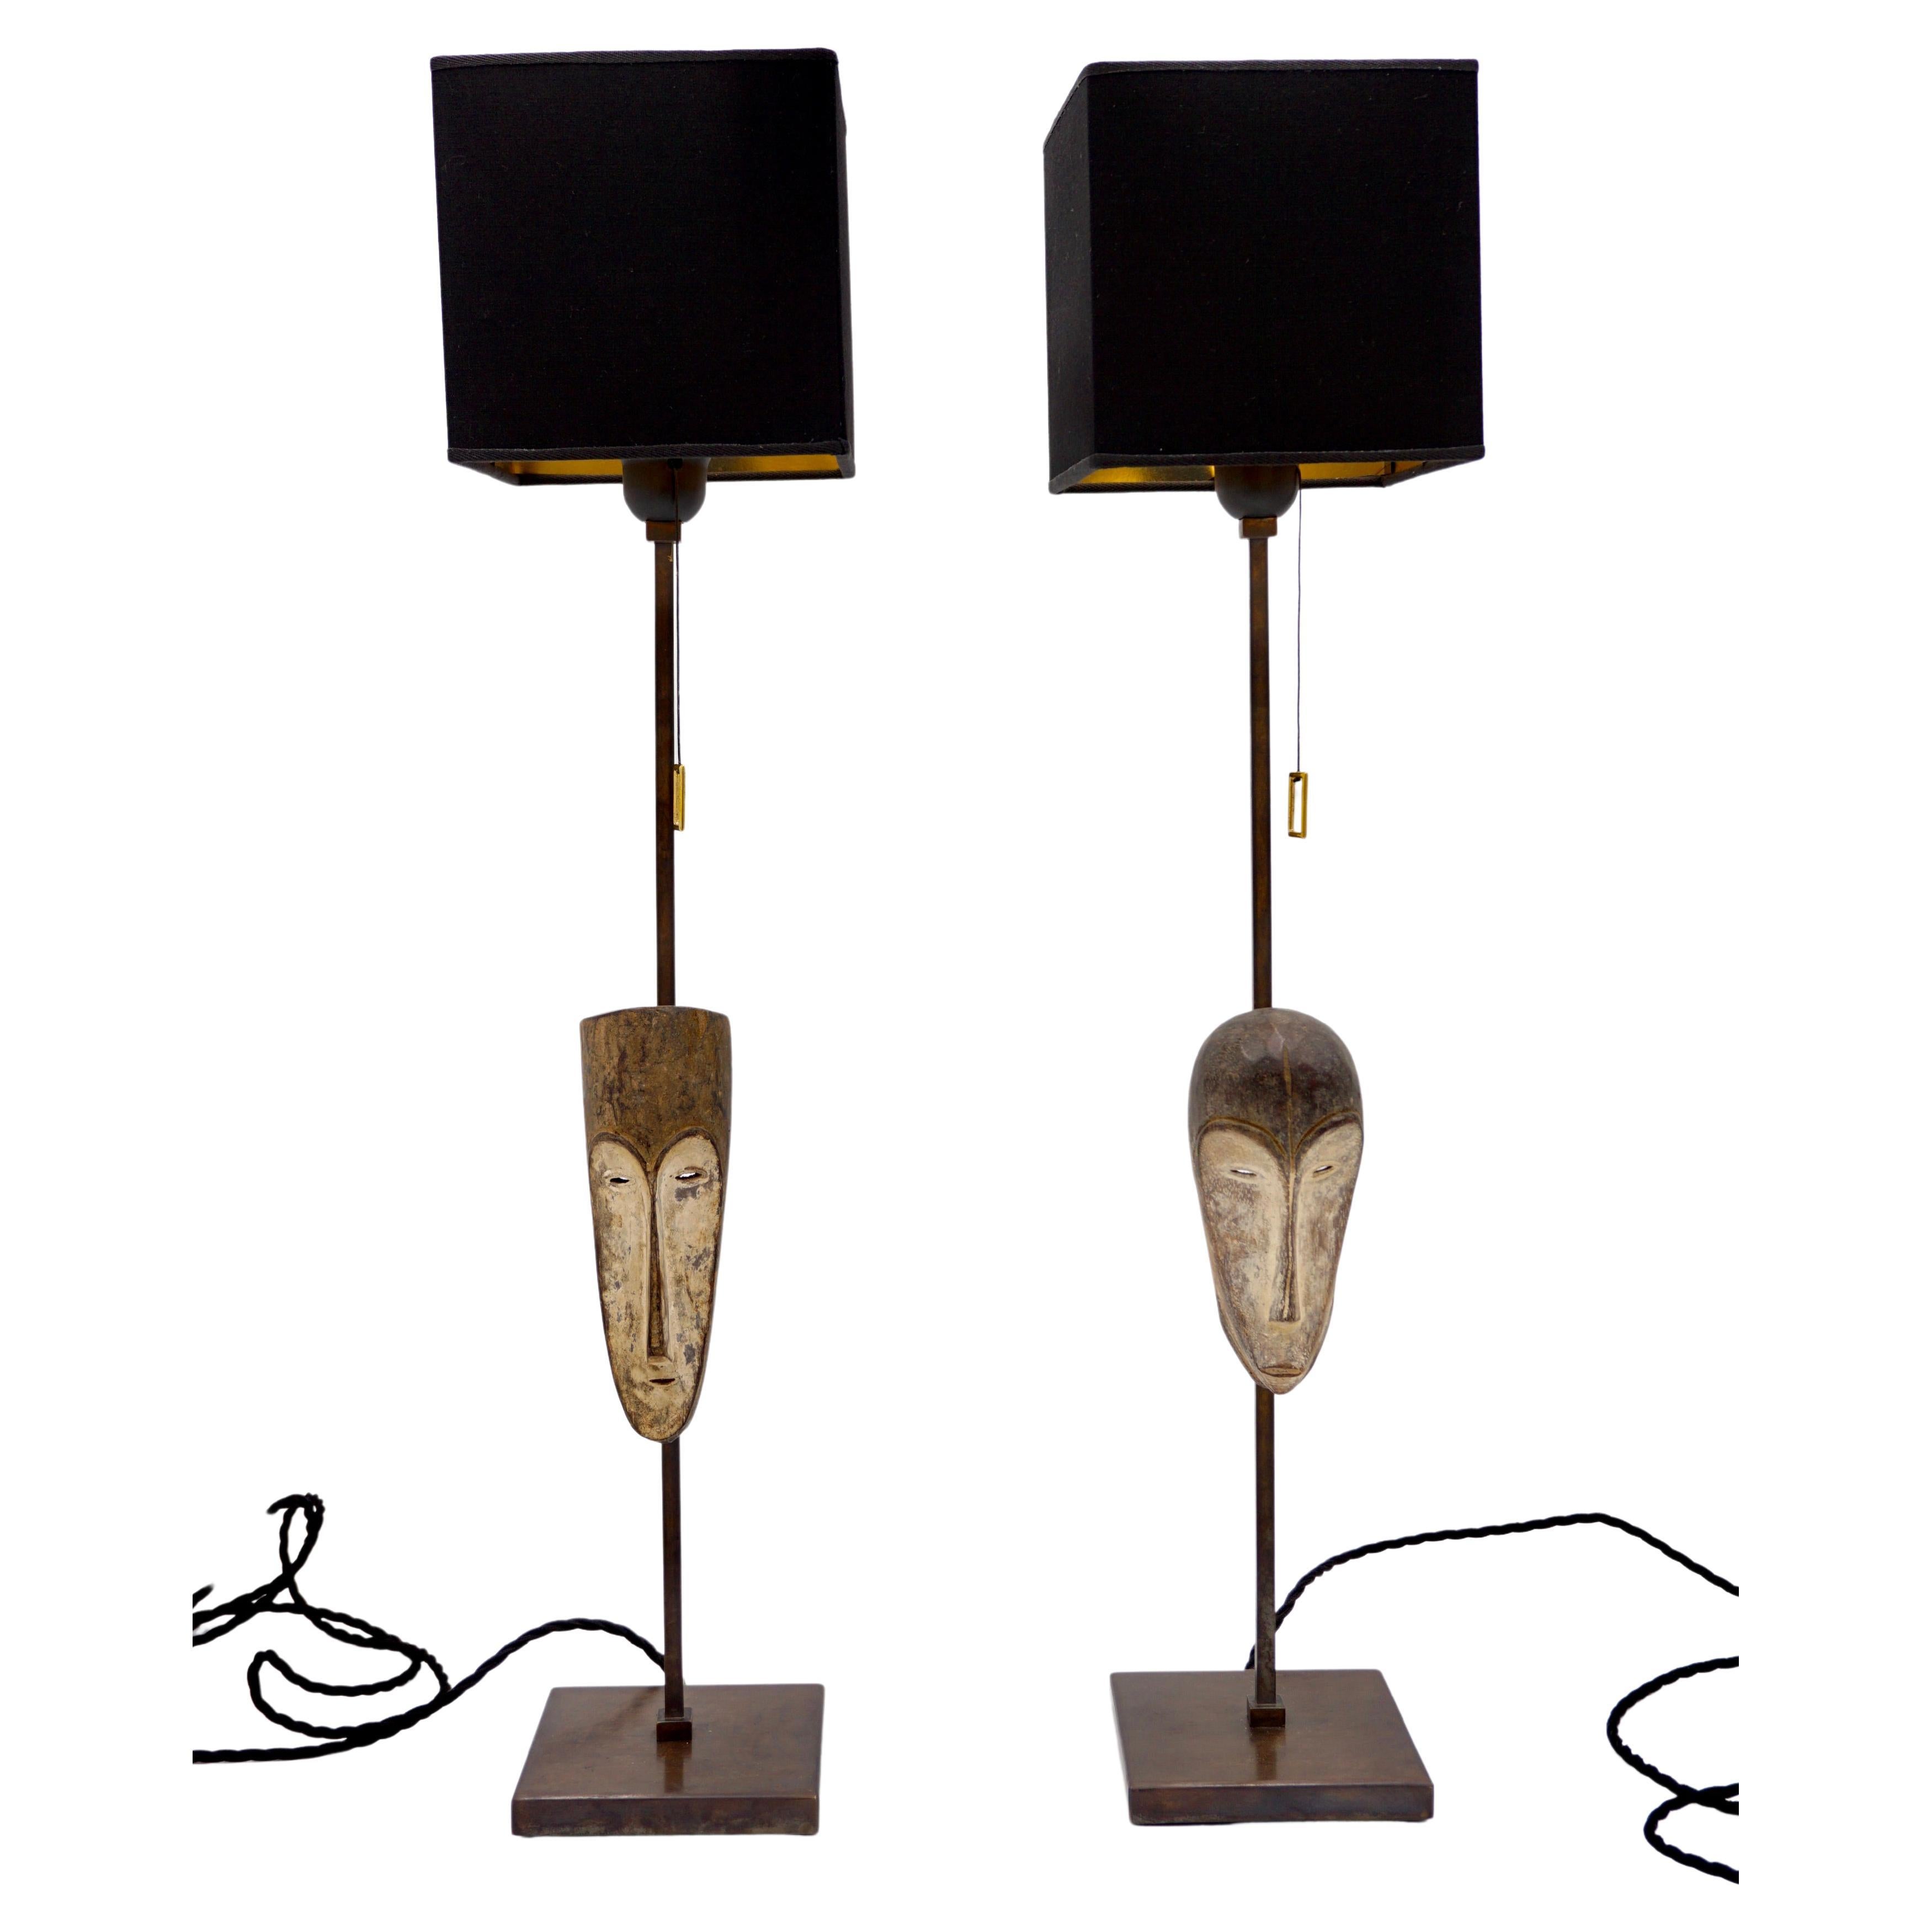 "Masterpieces of Light" Pair of Cubist Table Lamps with Fang Ngil Masks, 1910